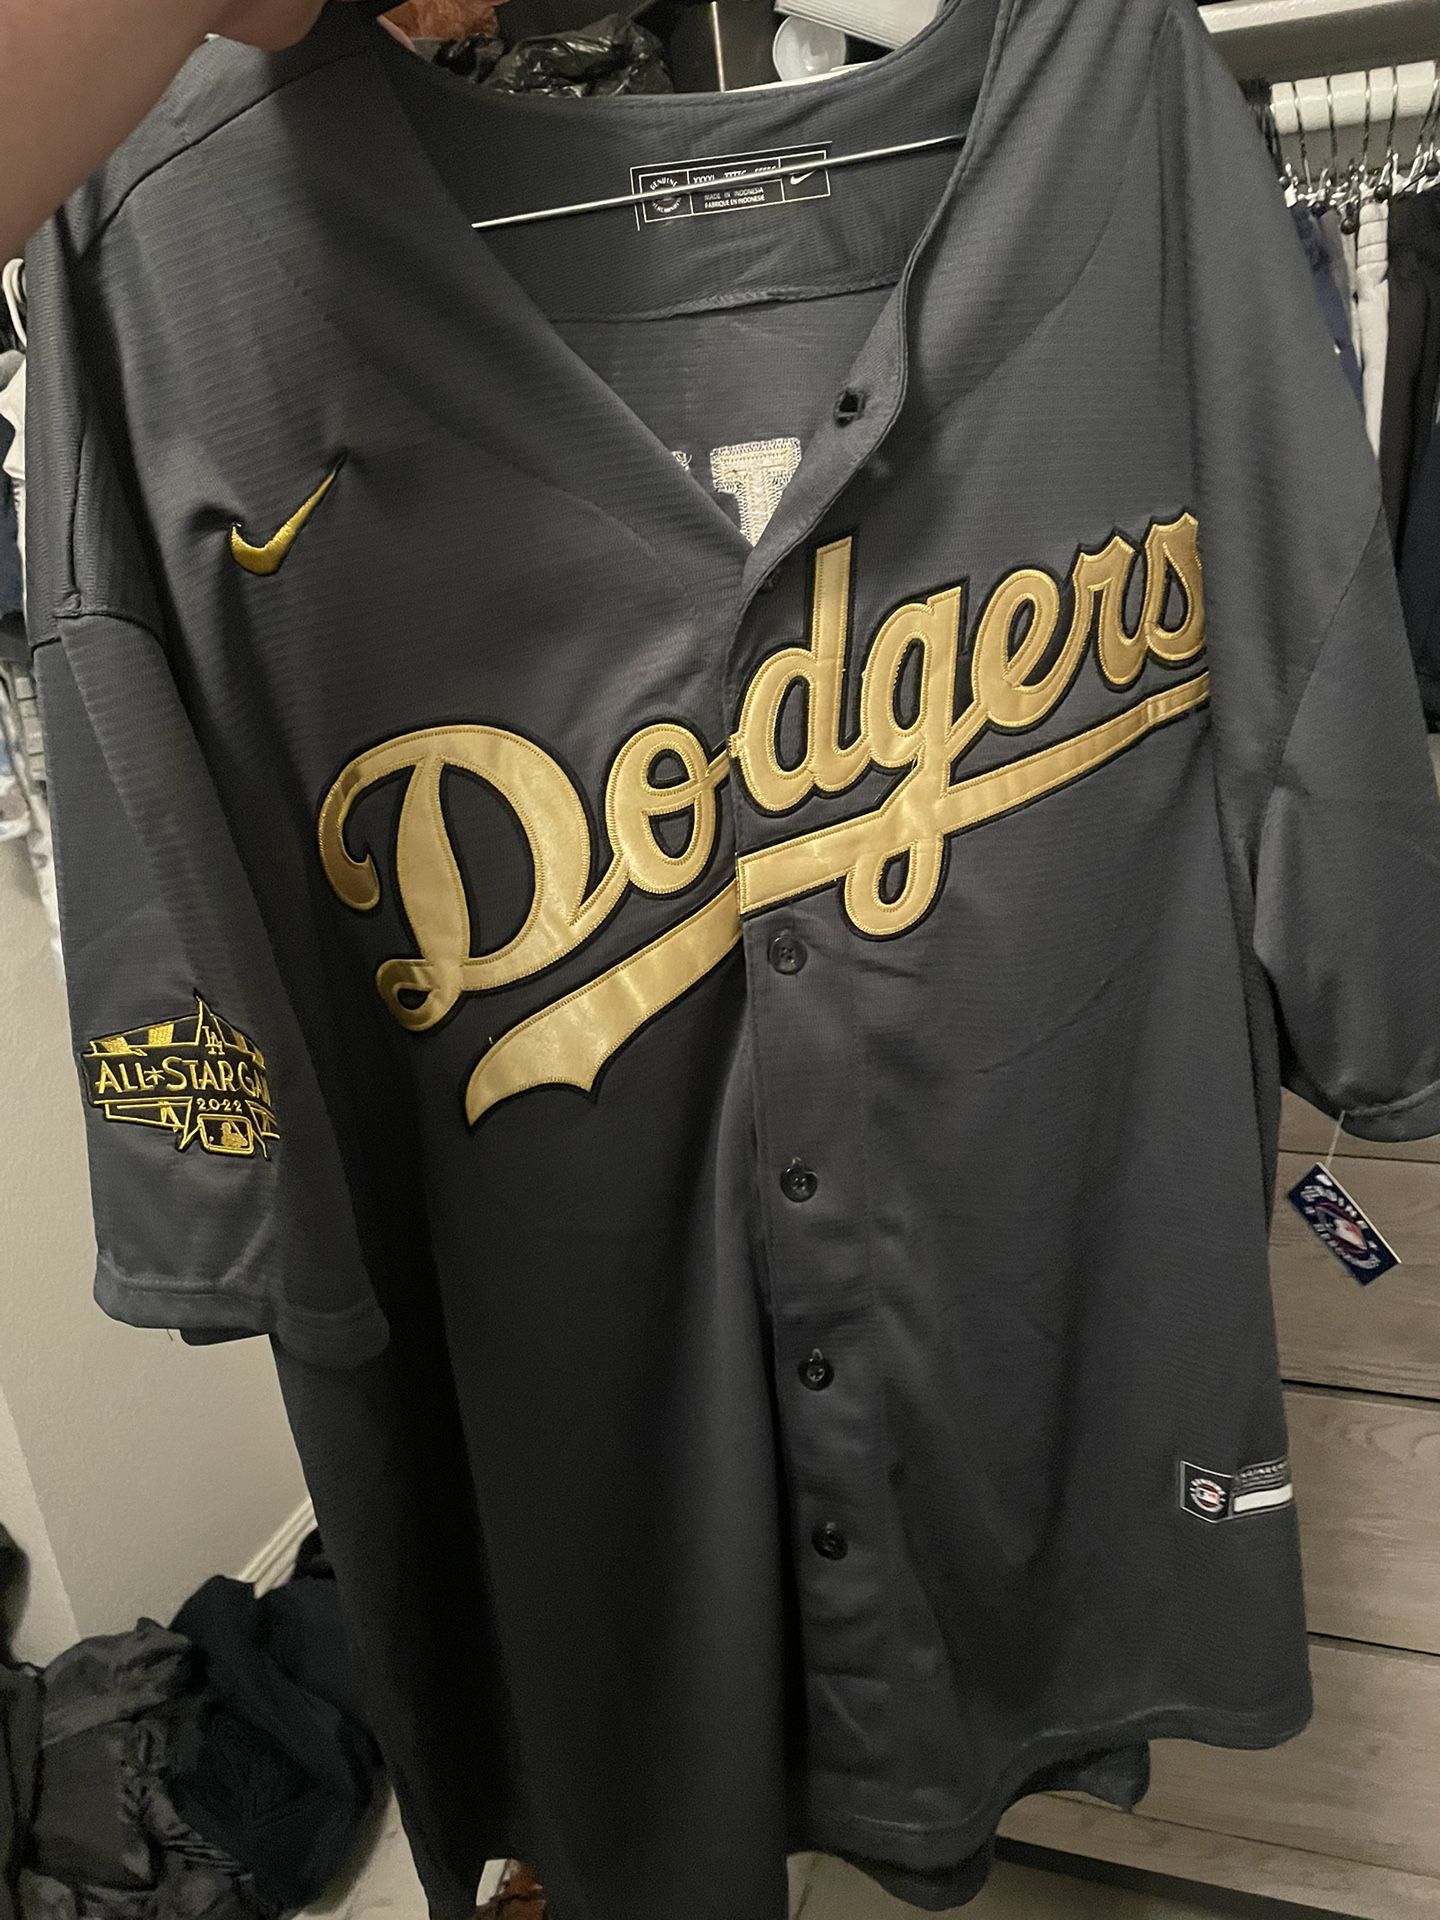 Mookie Betts Dodger Jersey 3x for Sale in Fontana, CA - OfferUp